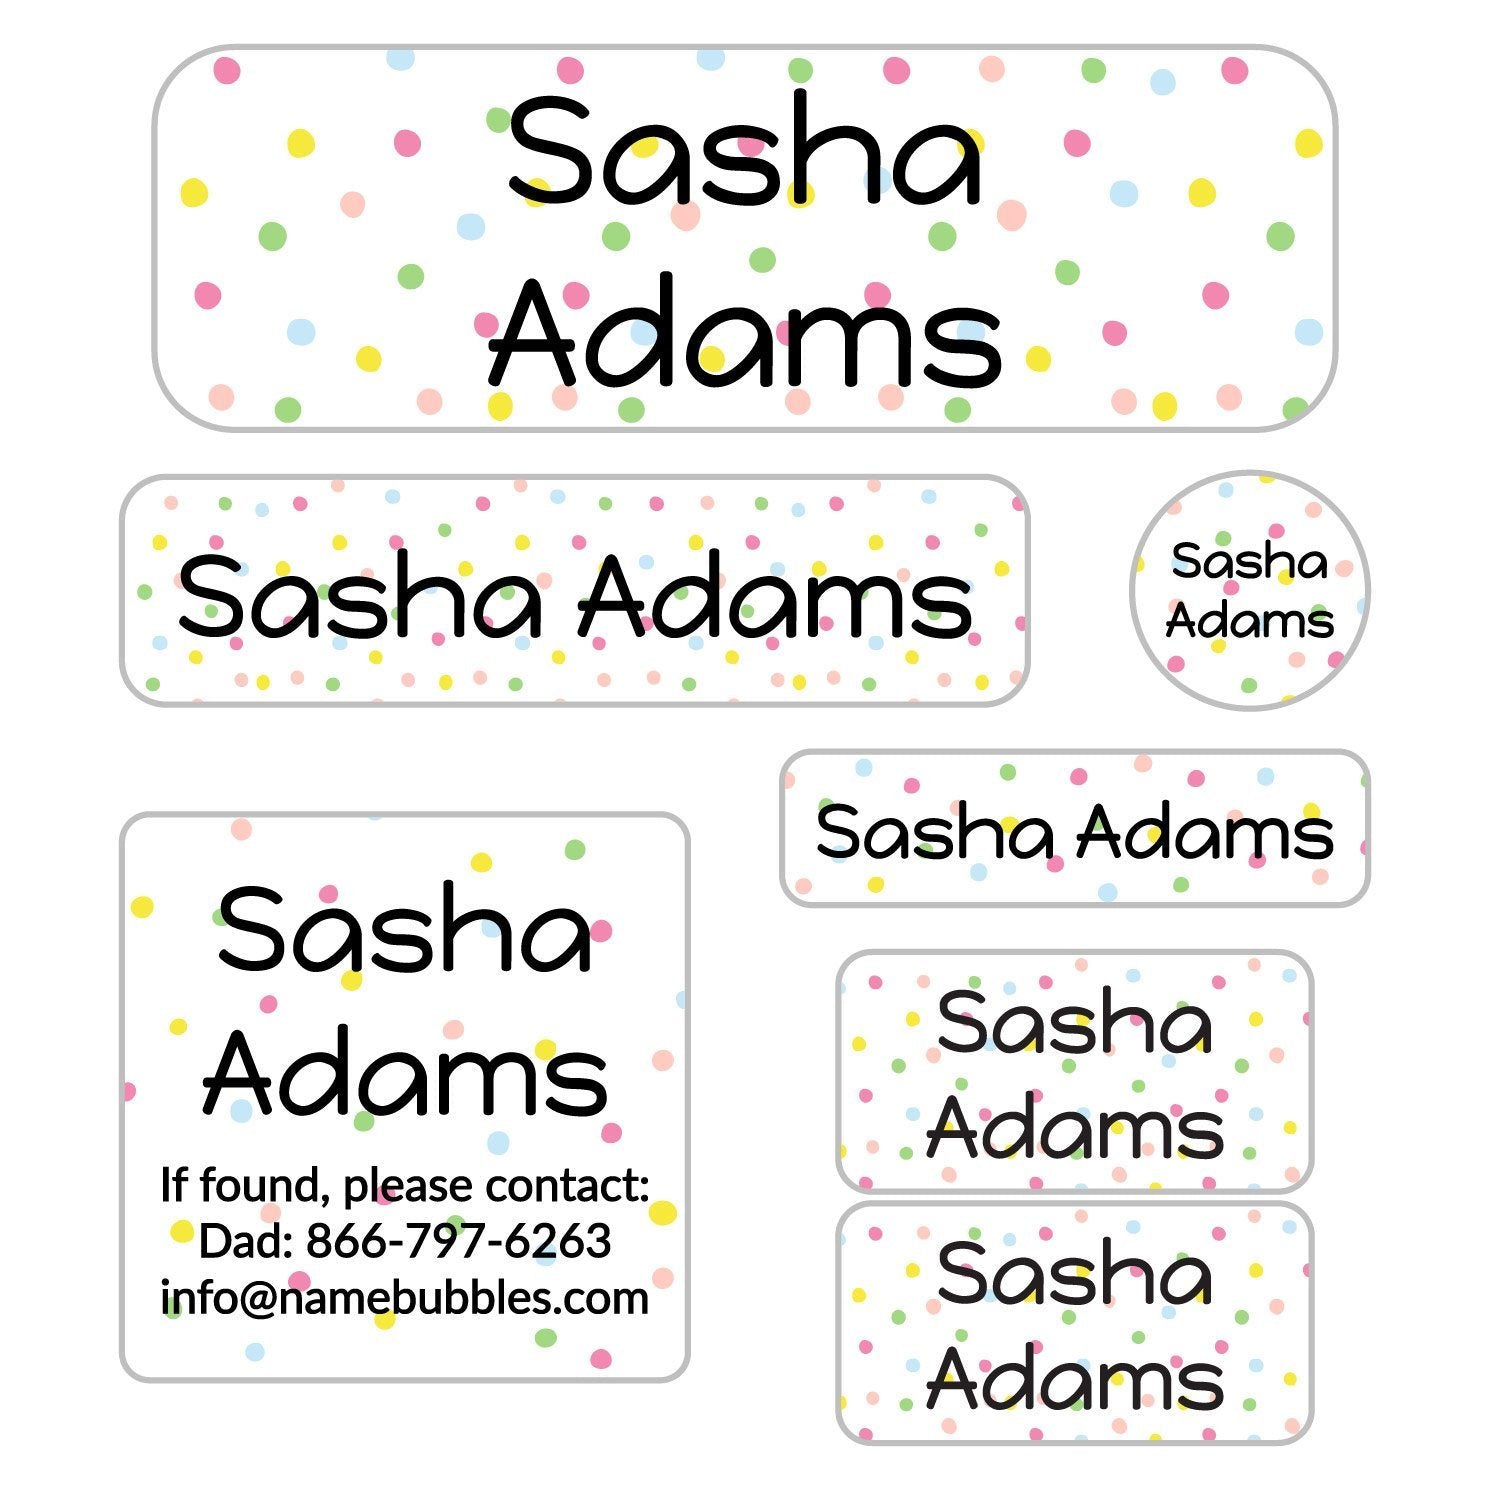 30 x Customized Name Labels | Perfect Kids Daycare and School Supplys Tag  Labels | Cute Children's Name Label Pack - Waterproof Safe